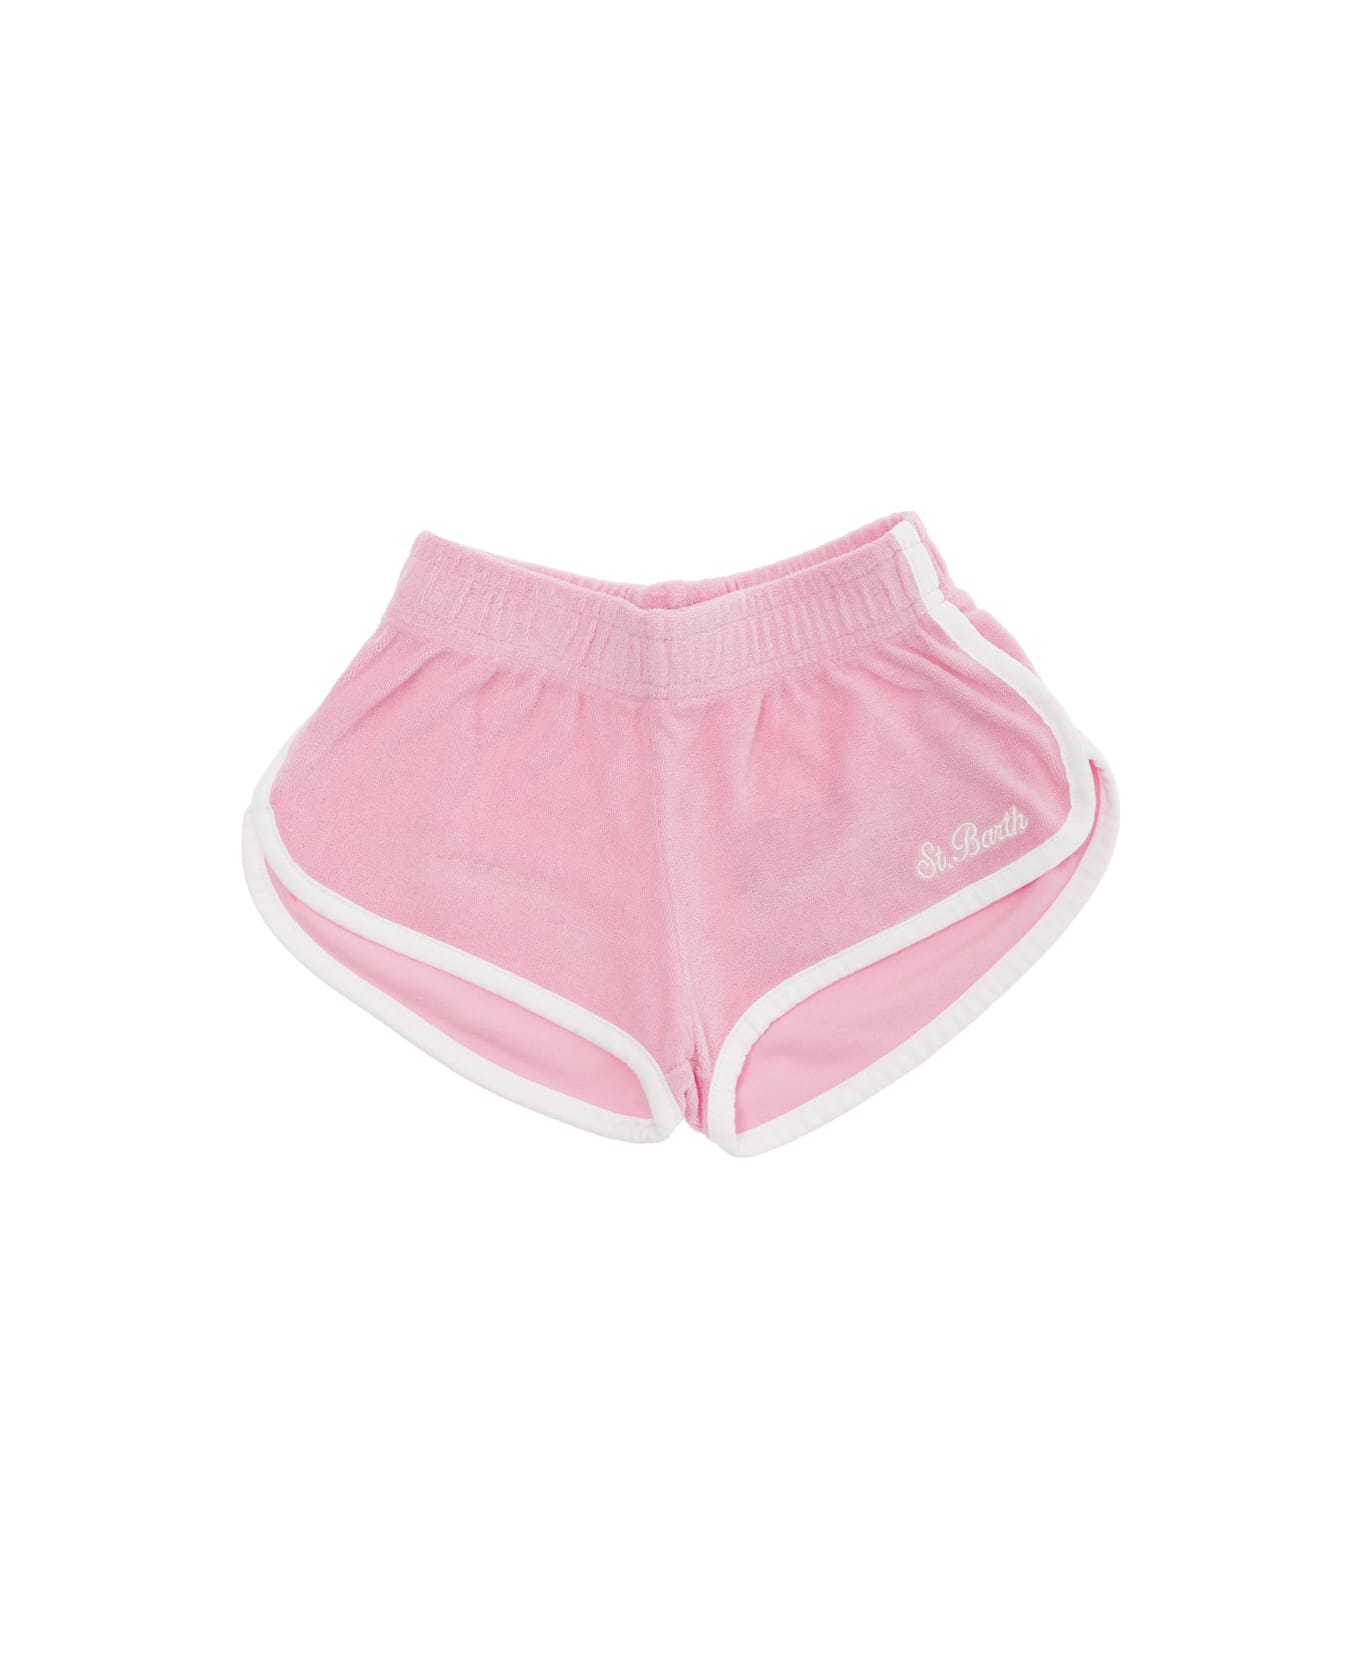 MC2 Saint Barth Pink Shorts With Logo Lettering Embroidery In Cotton Blend Girl - Pink